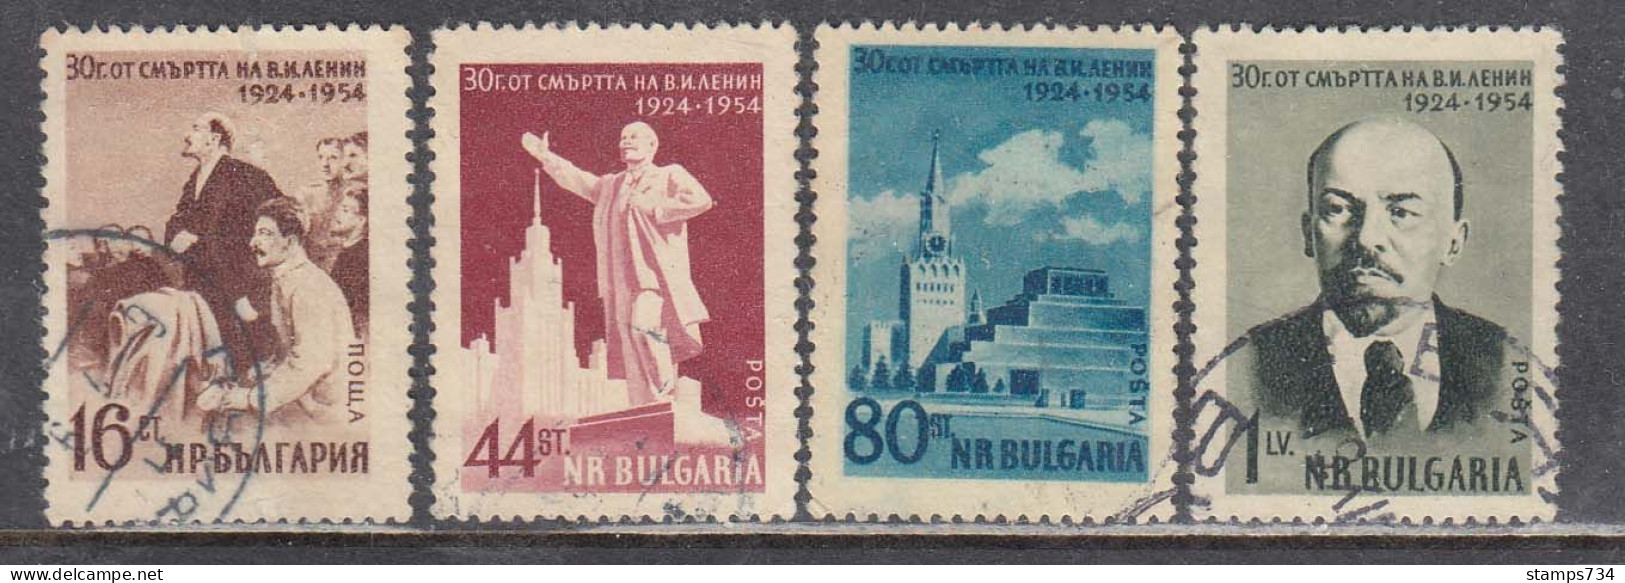 Bulgaria 1954 - 30th Anniversary Of Lenin's Death, Mi-Nr. 900/03, Used - Used Stamps